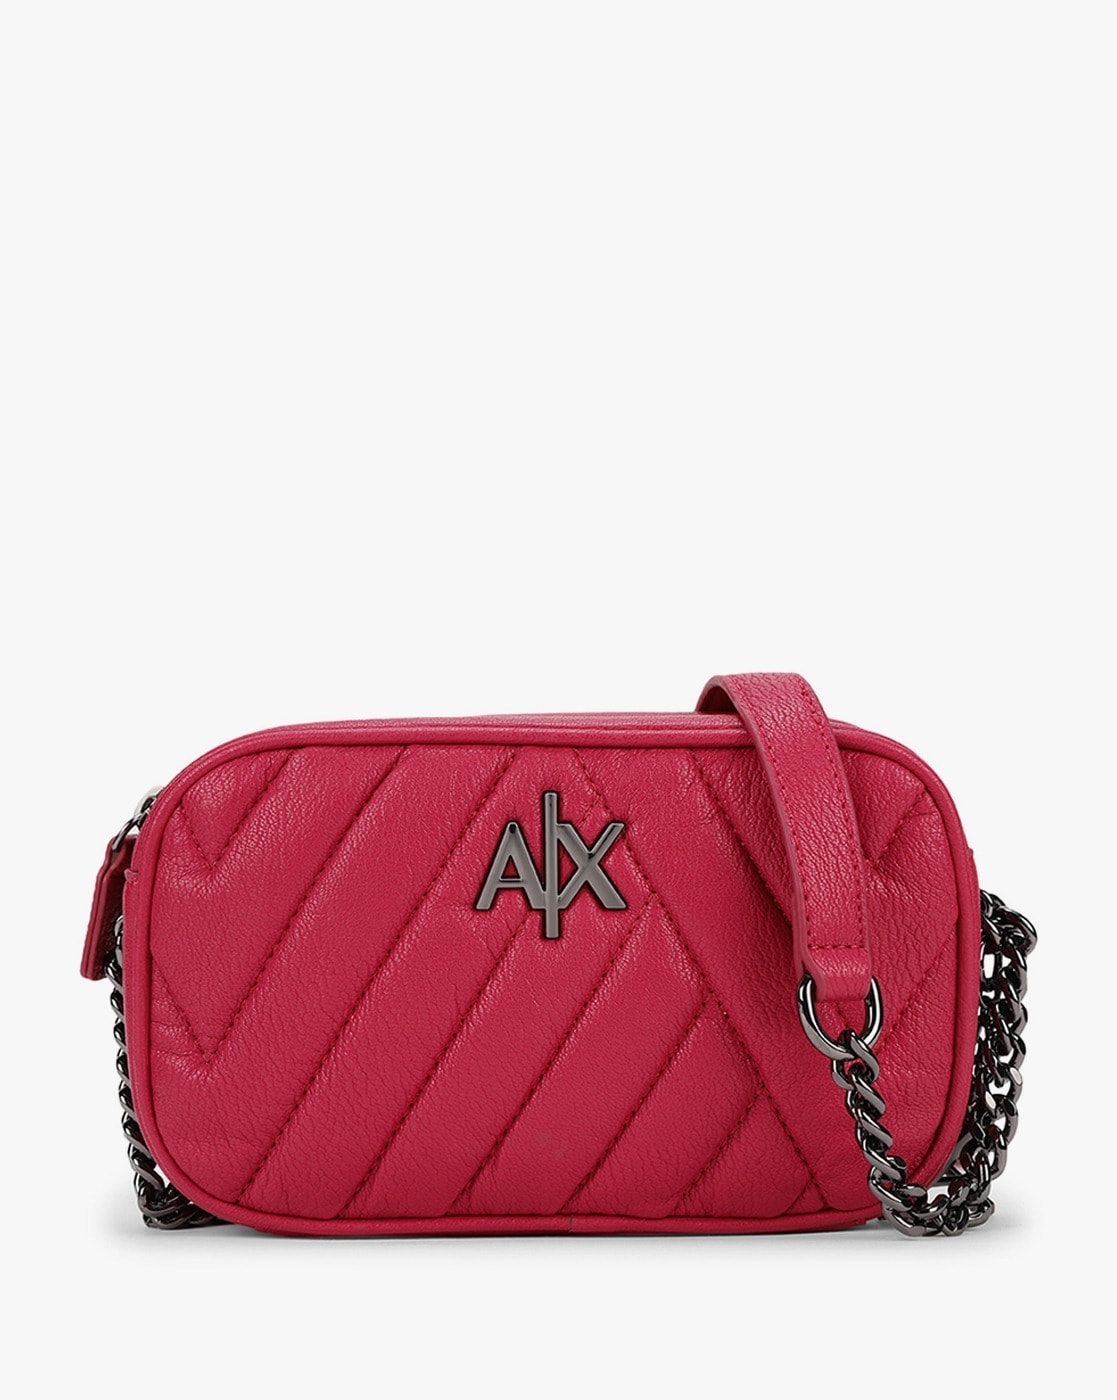 Armani Exchange Bags and Accessories